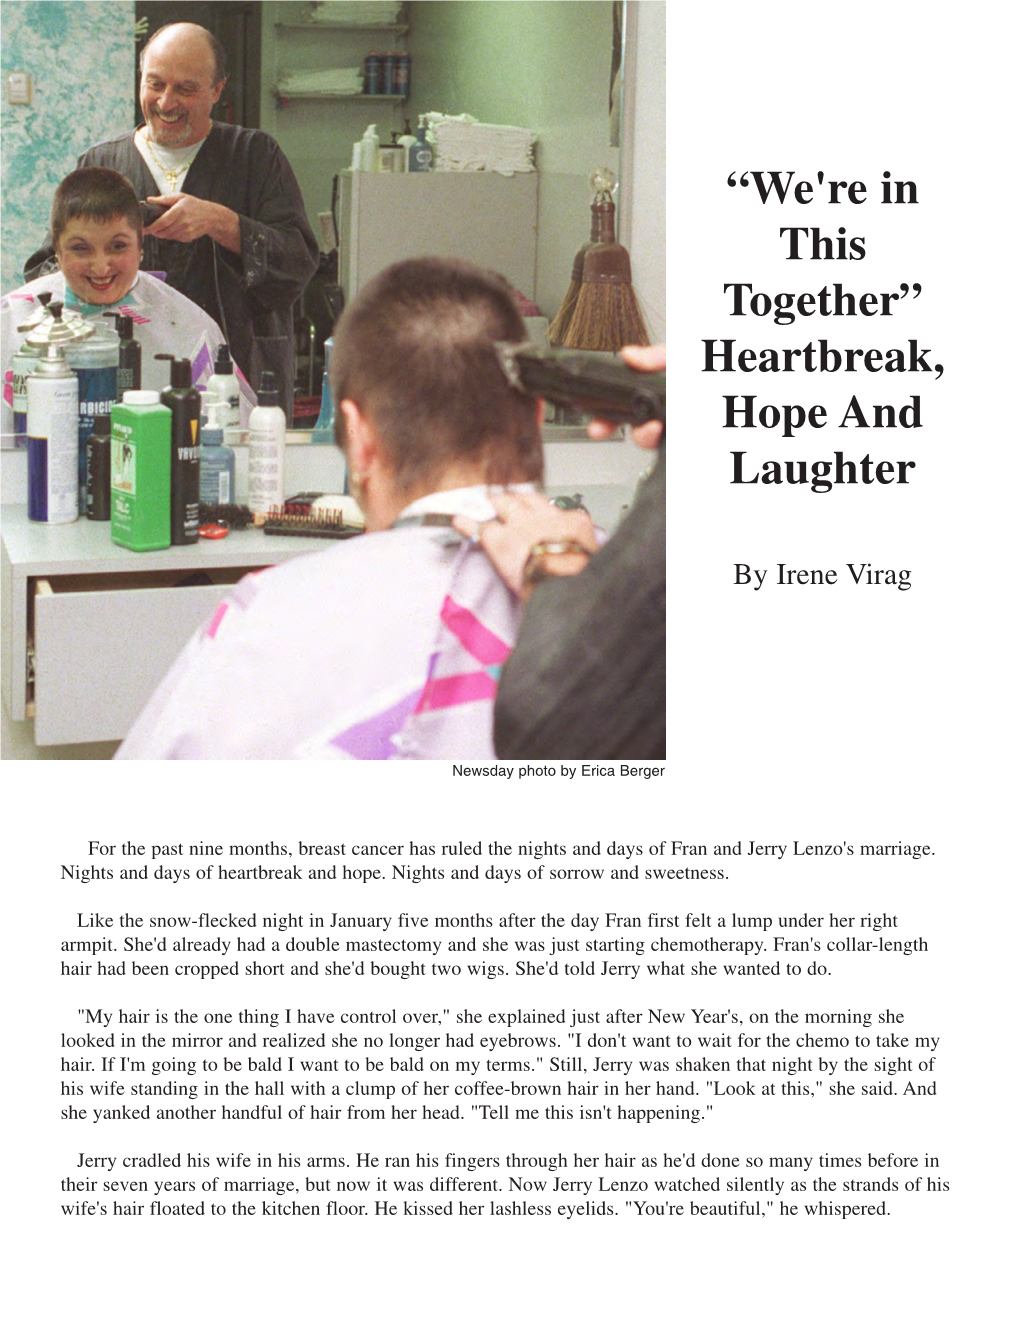 “We're in This Together” Heartbreak, Hope and Laughter